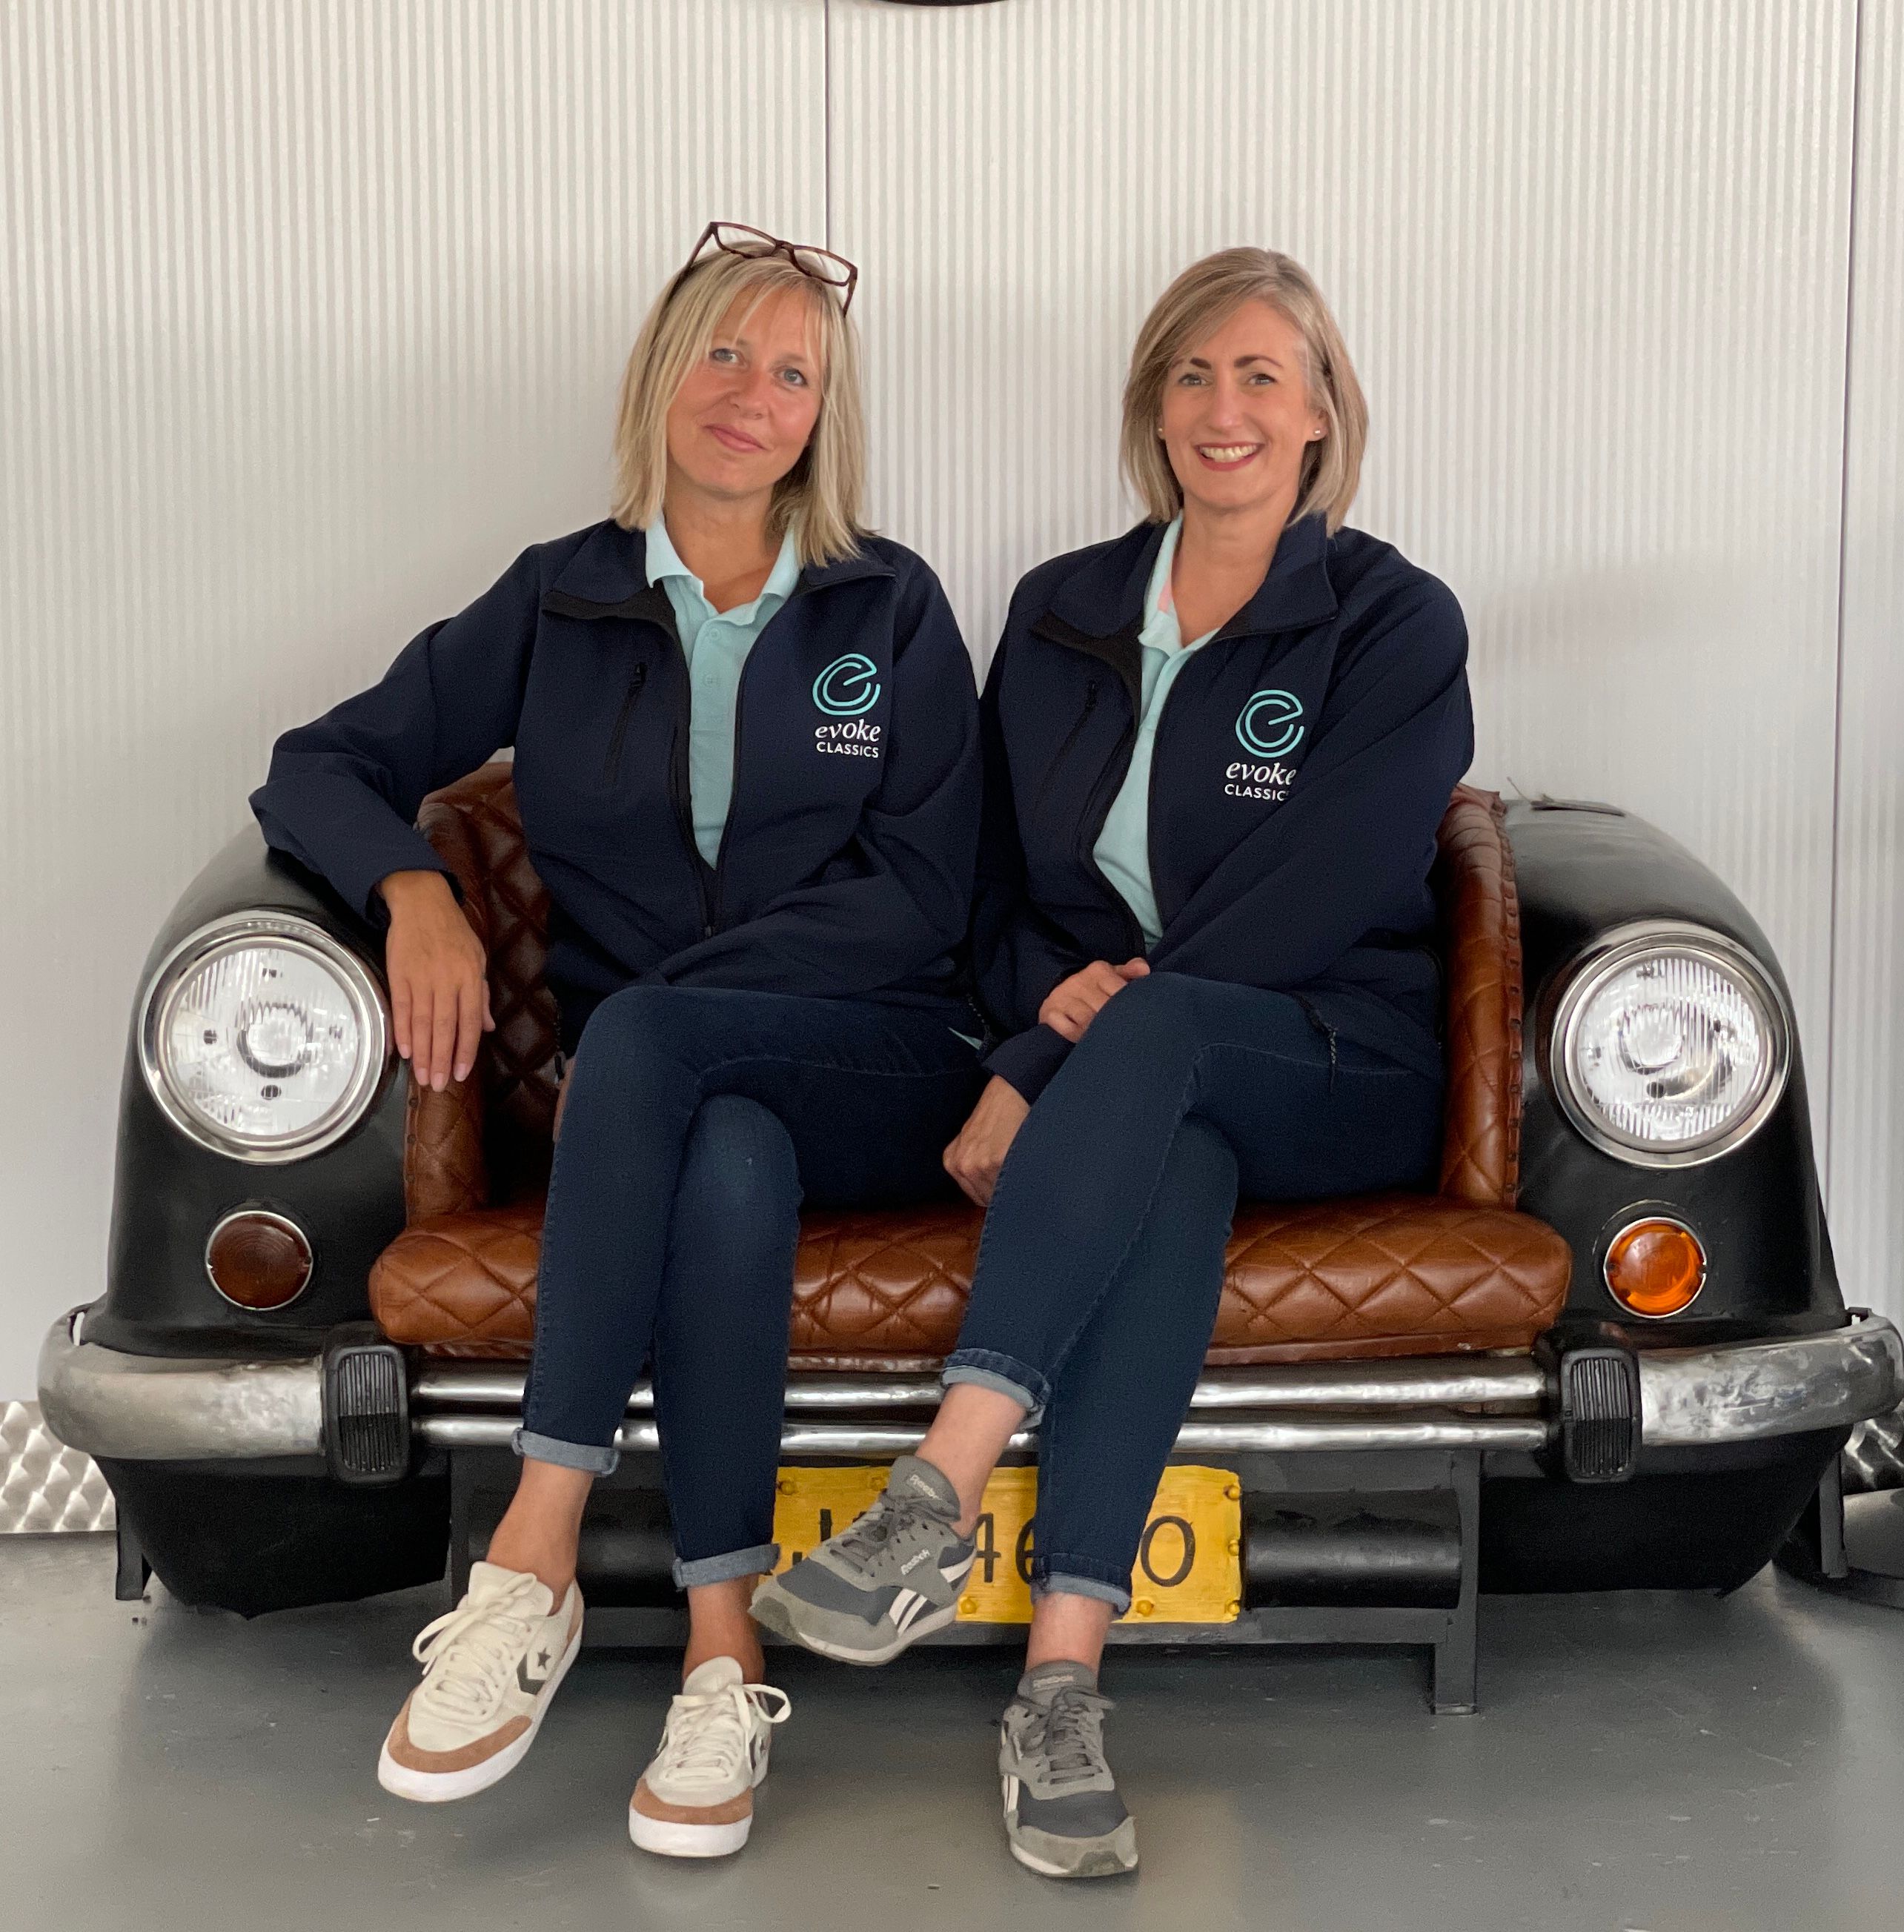 Classic car TV personality Sarah Crabtree to launch classic car auction and community website